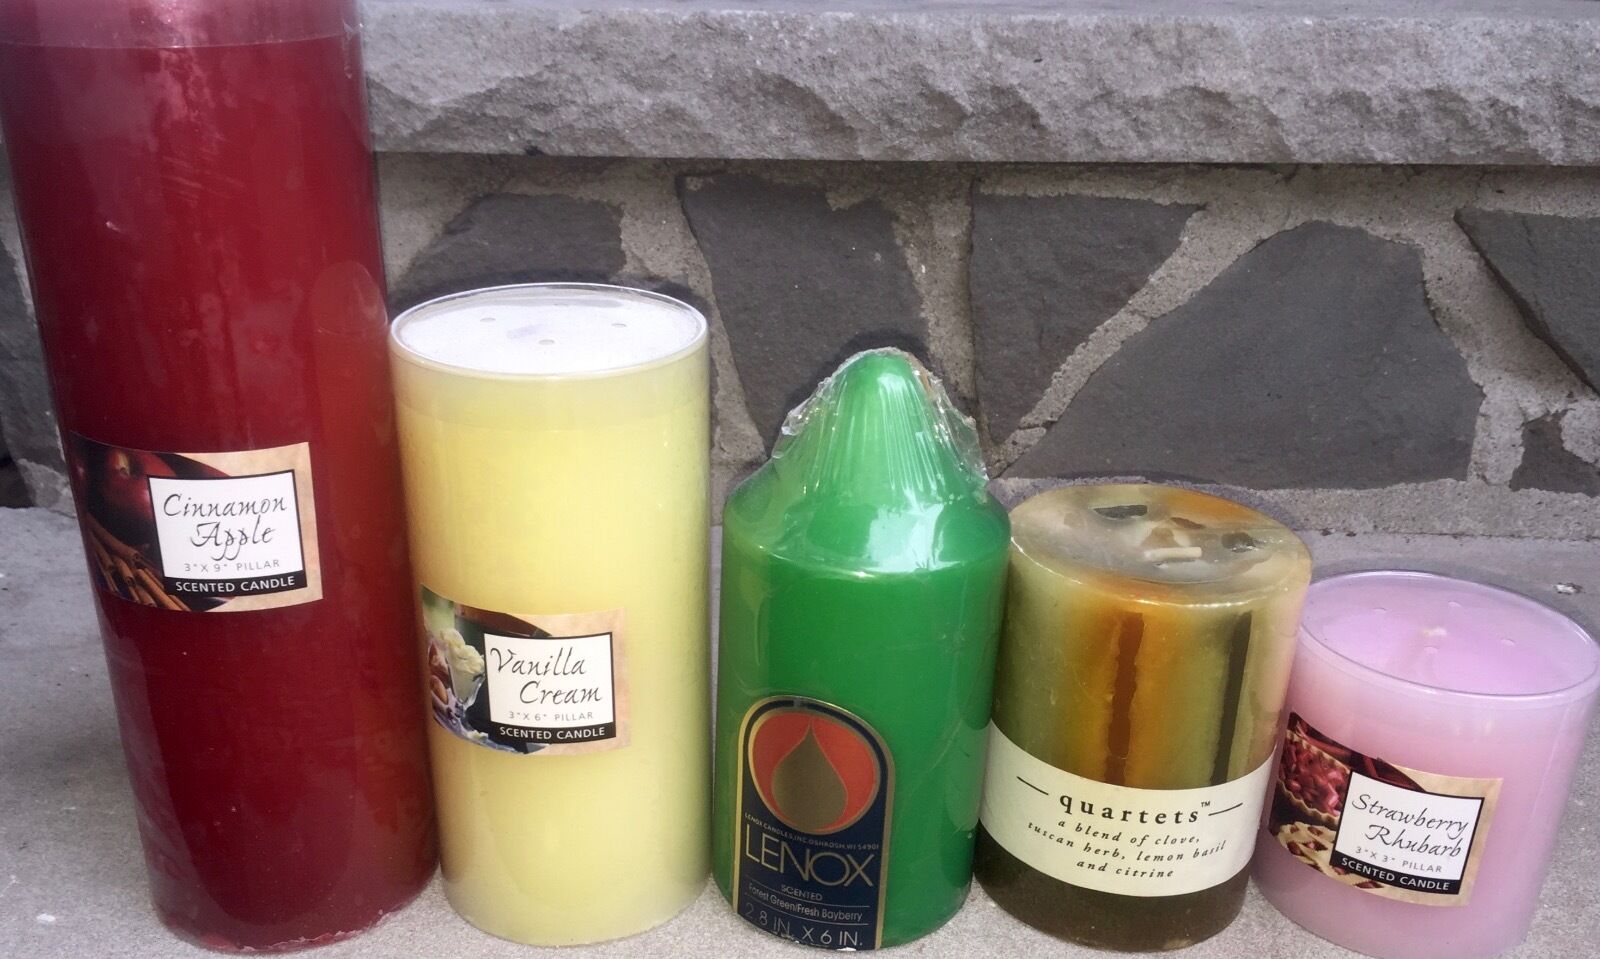 Candle Scented Bundle Value Pack Sale package of 5 varied sizes scents colors